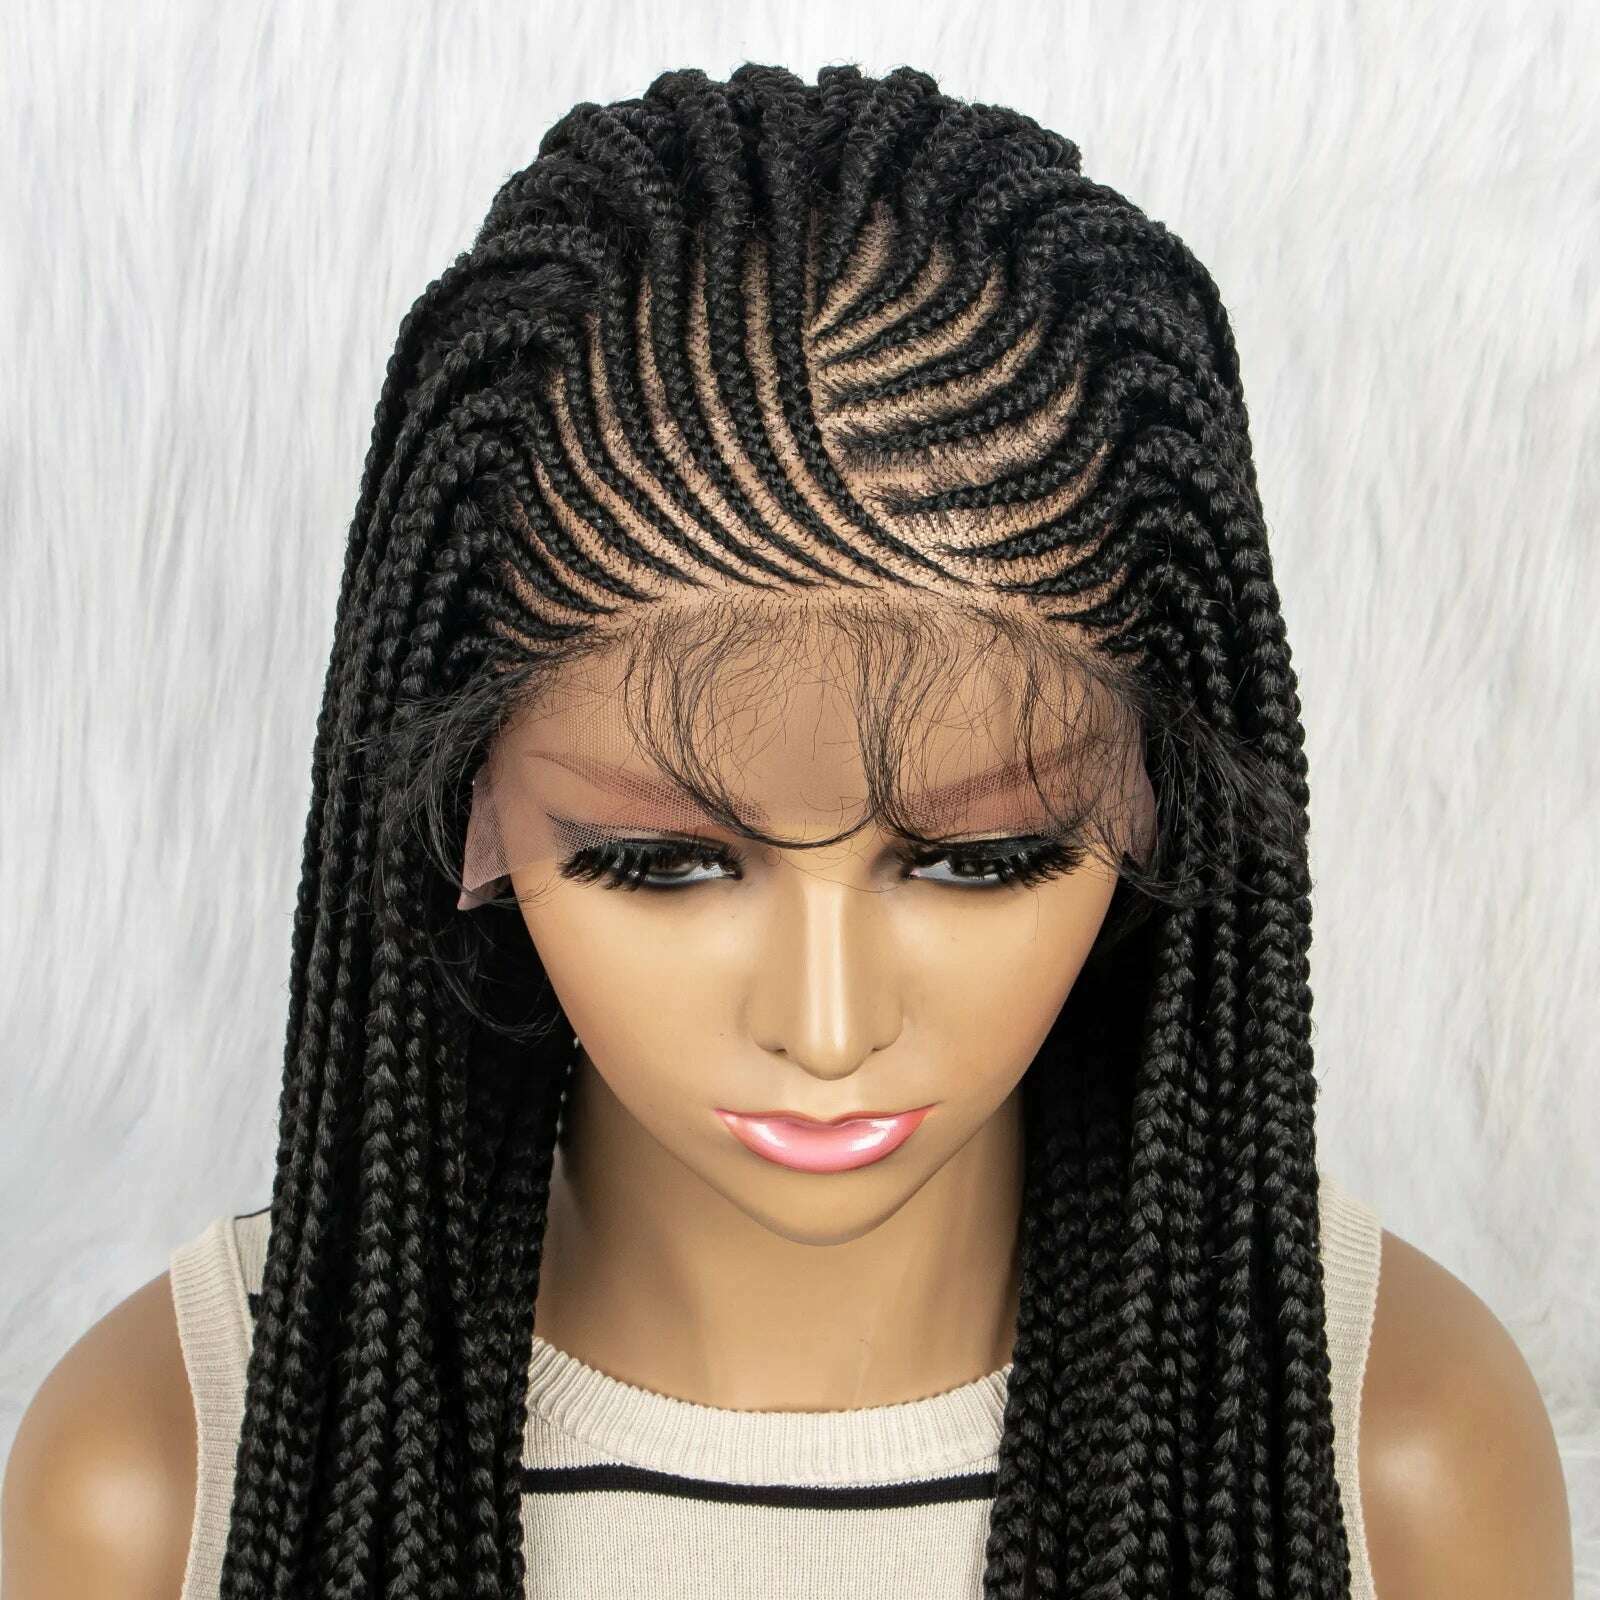 KIMLUD, Synthetic Braided Wigs 13x4 HD Lace Front Braided Wigs for Black Women Synthetic Lace Front Wigs Braided Wigs With Baby Hair, 1B / 28inches, KIMLUD Women's Clothes